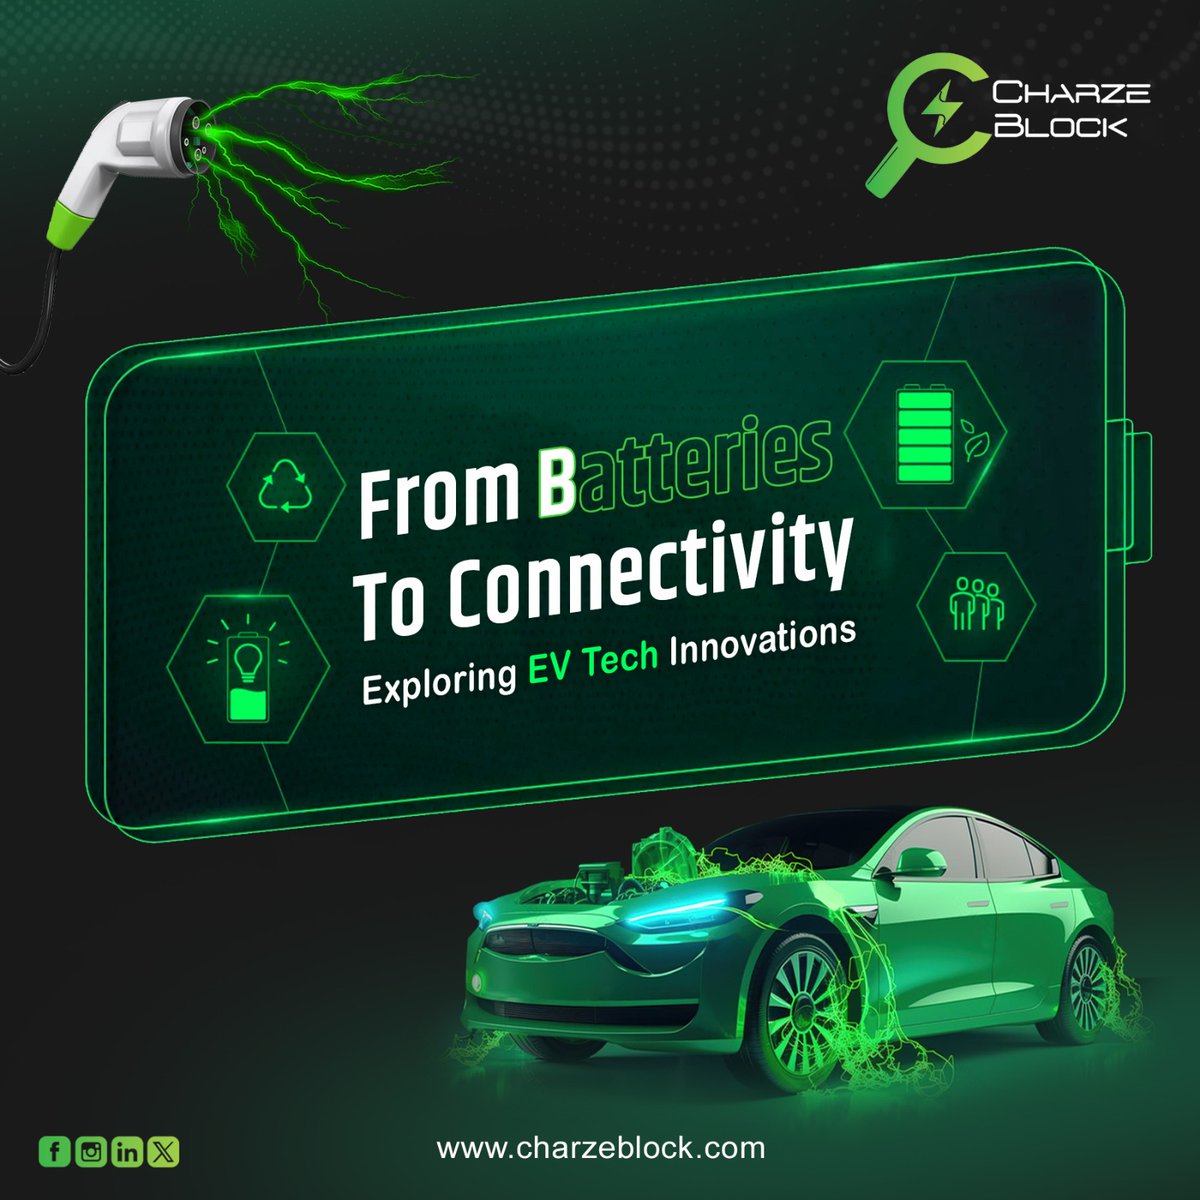 Join the #EVrevolution! From battery range to seamless connectivity, explore the #innovations that are driving the #electricvehicle revolution. From zero to hero: Learn about the battery breakthroughs and #connectivity wizardry shaping the EV landscape. ⚡🔗#EVcharge #Charzeblock